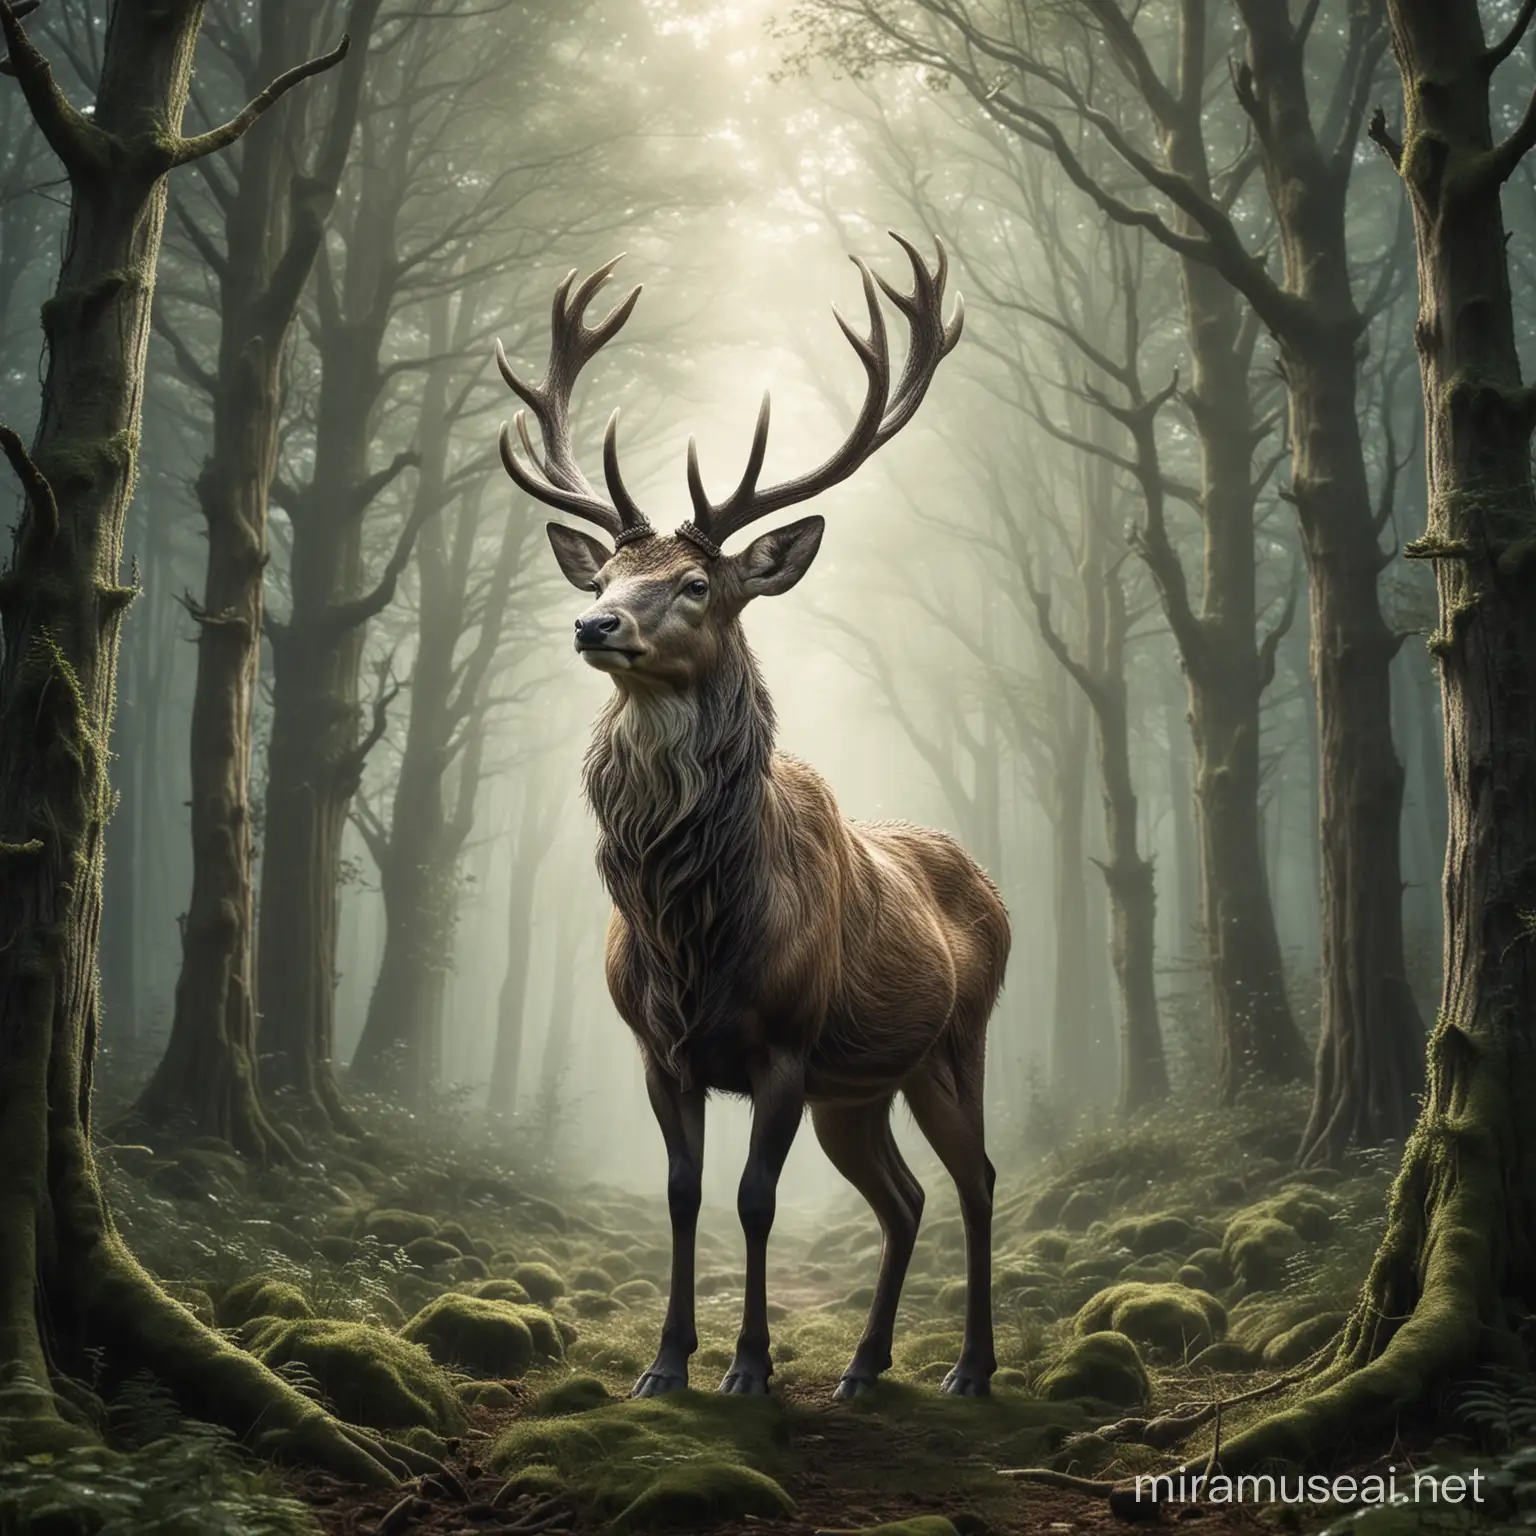 Spiritual forest stag